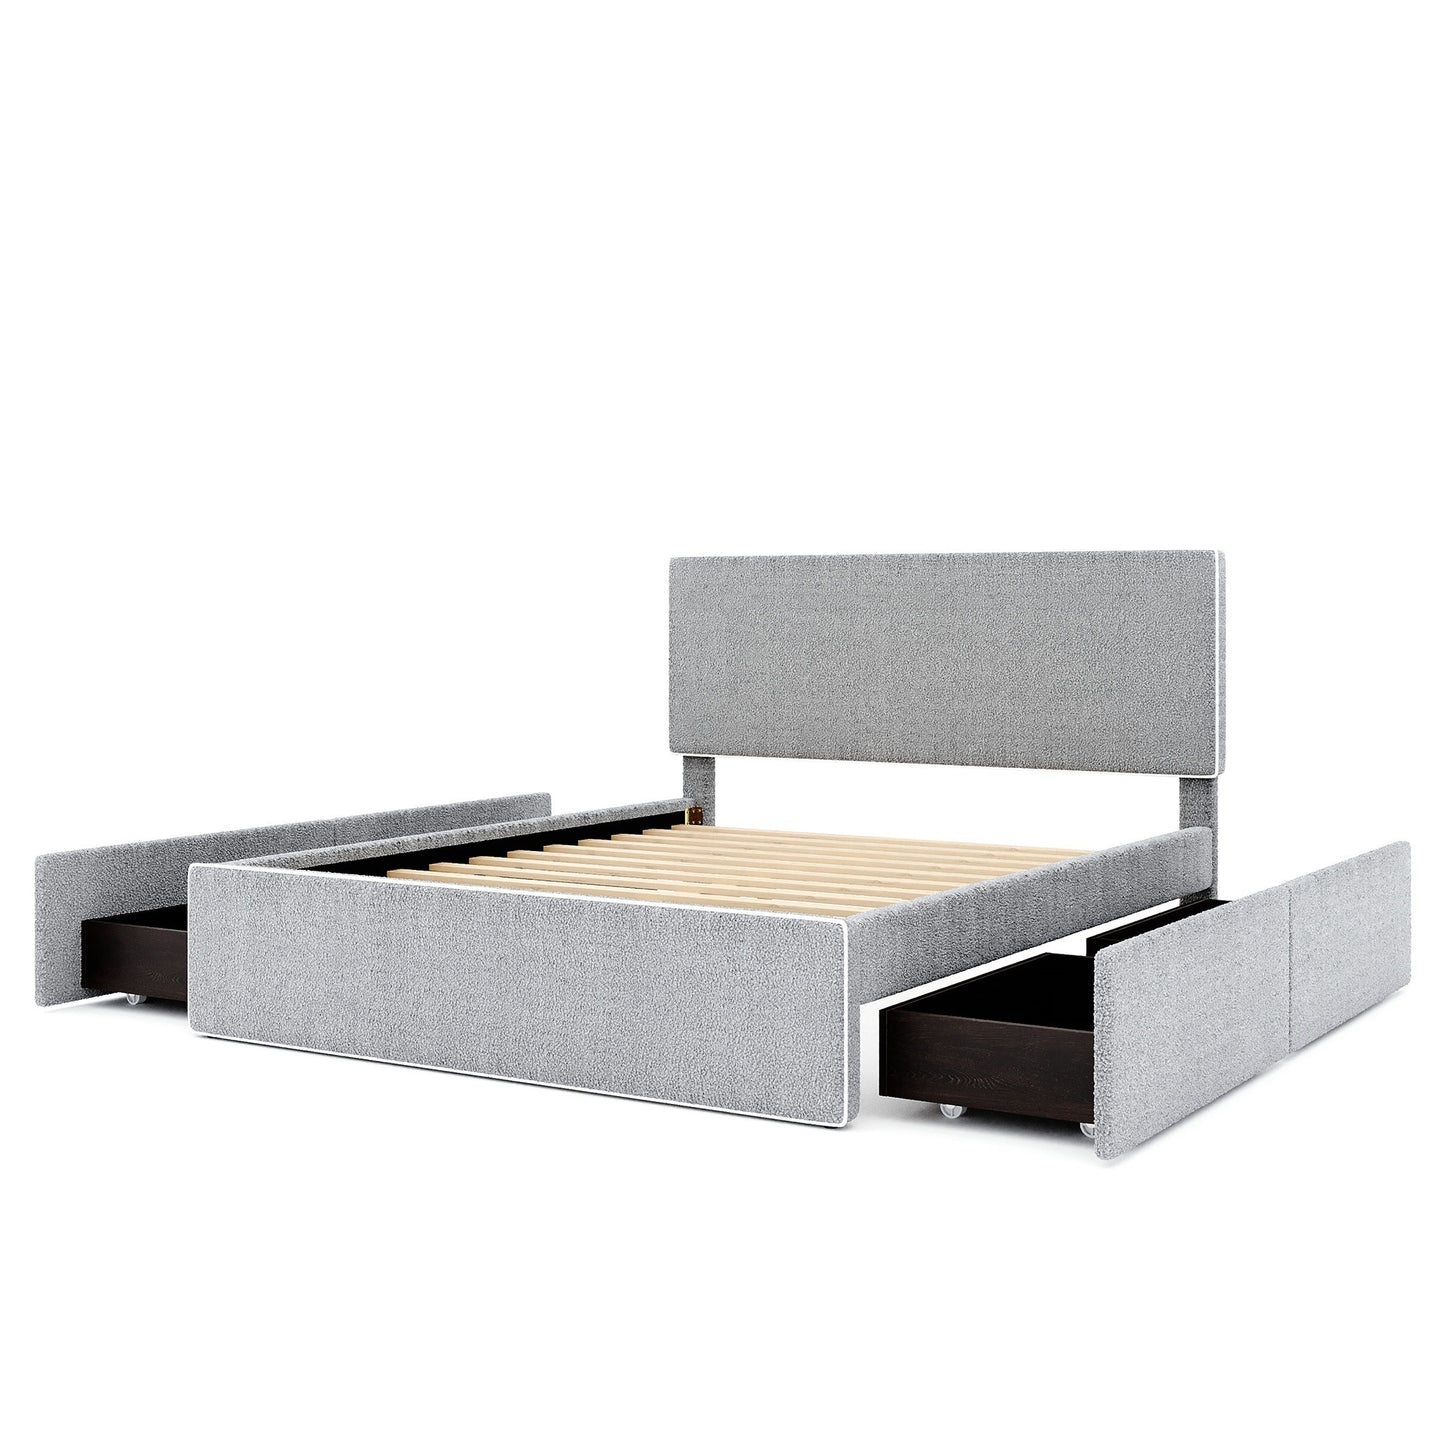 Full Size Upholstered Platform Bed with 4 Drawers and White Edge on the Headboard & Footboard, Gray